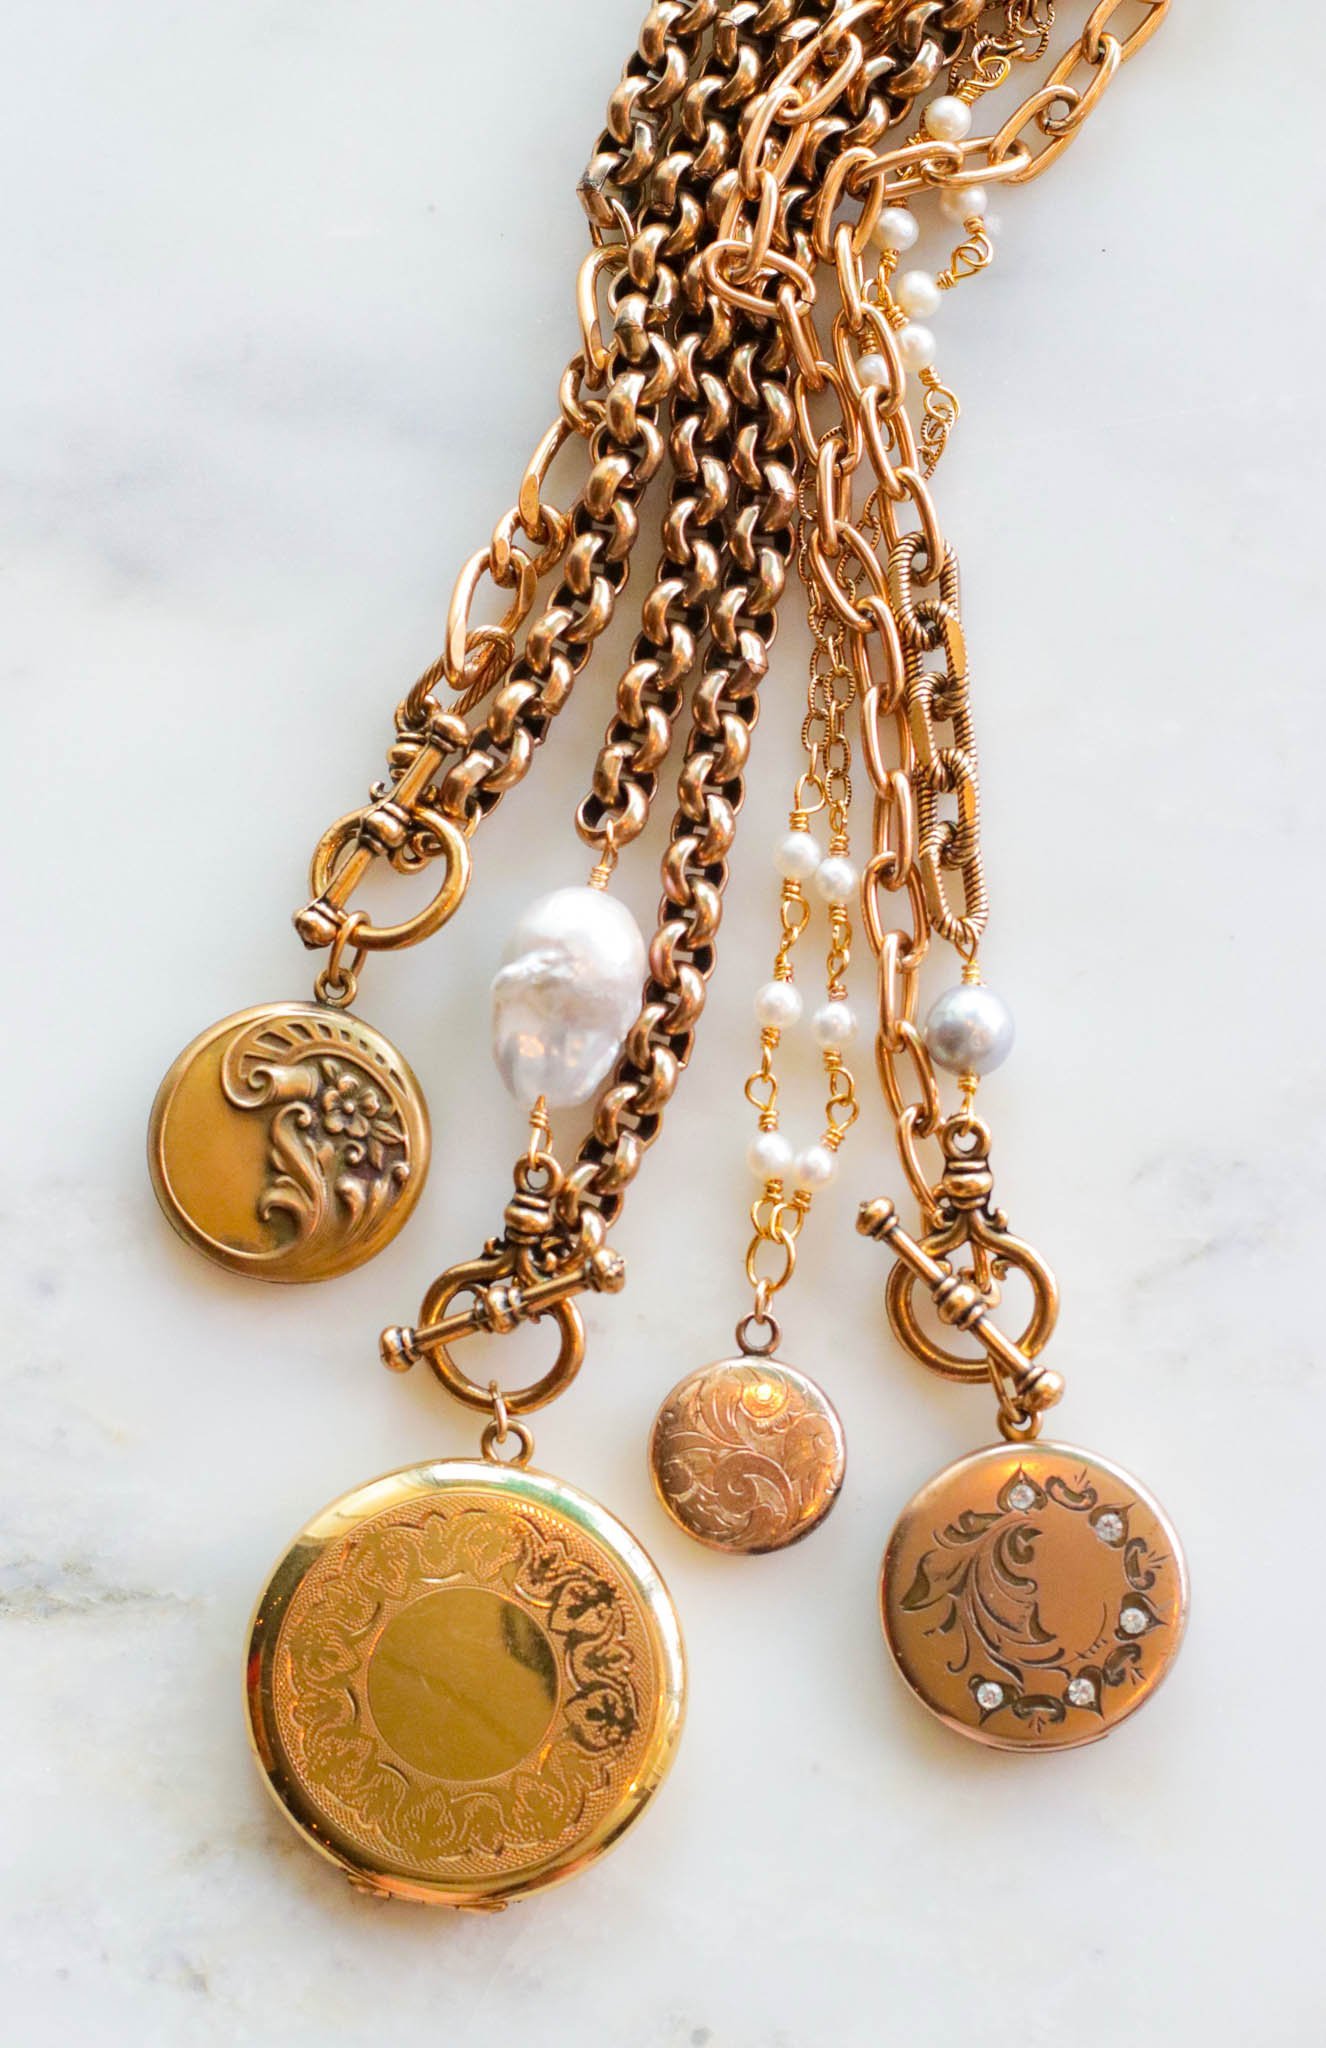 exvoto+jewelry+vintage+antique+lockets+with+gold+chains.jpeg